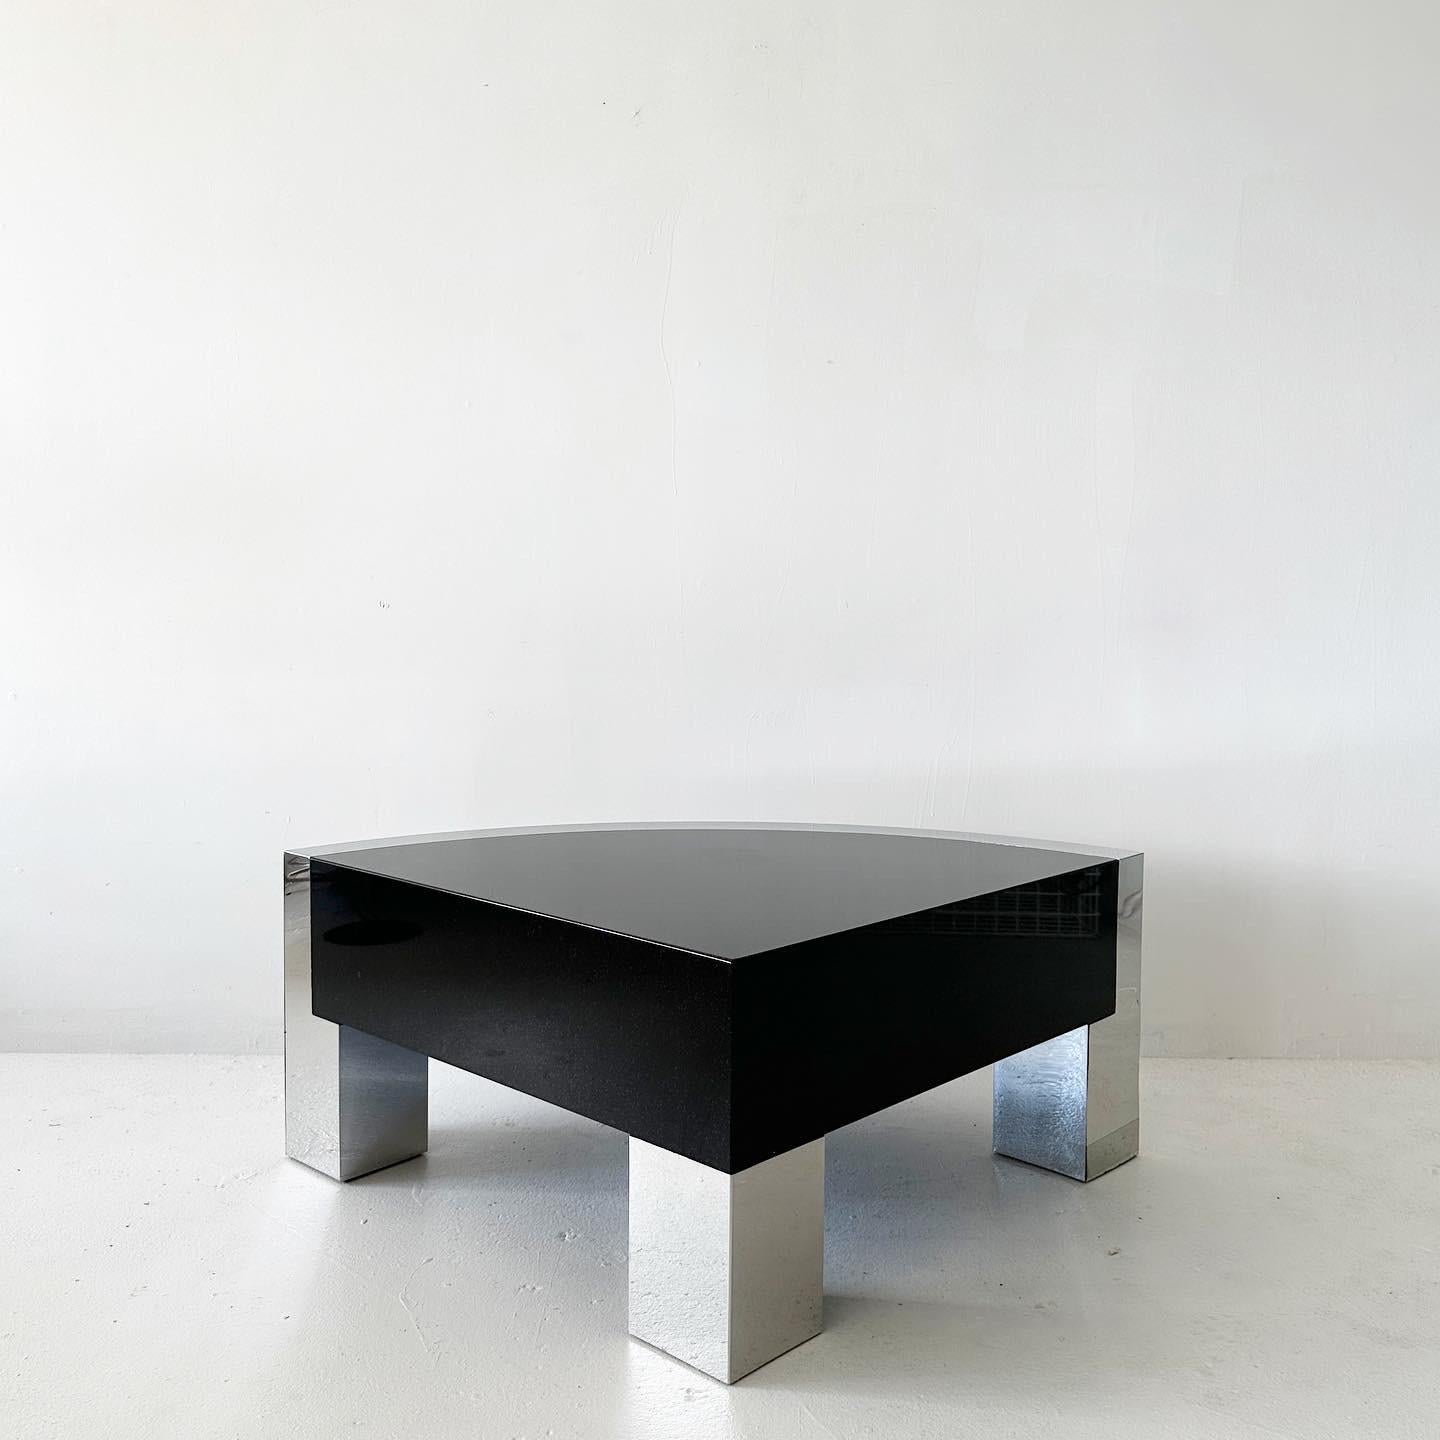 granite and mirrored chrome, rounded corner table, coffee table or side table. extraordinary and substantial. Can stand alone in front of seating, or quarter circle 90-degree design can fit flush into a corner—or can be improvised as seating itself. 